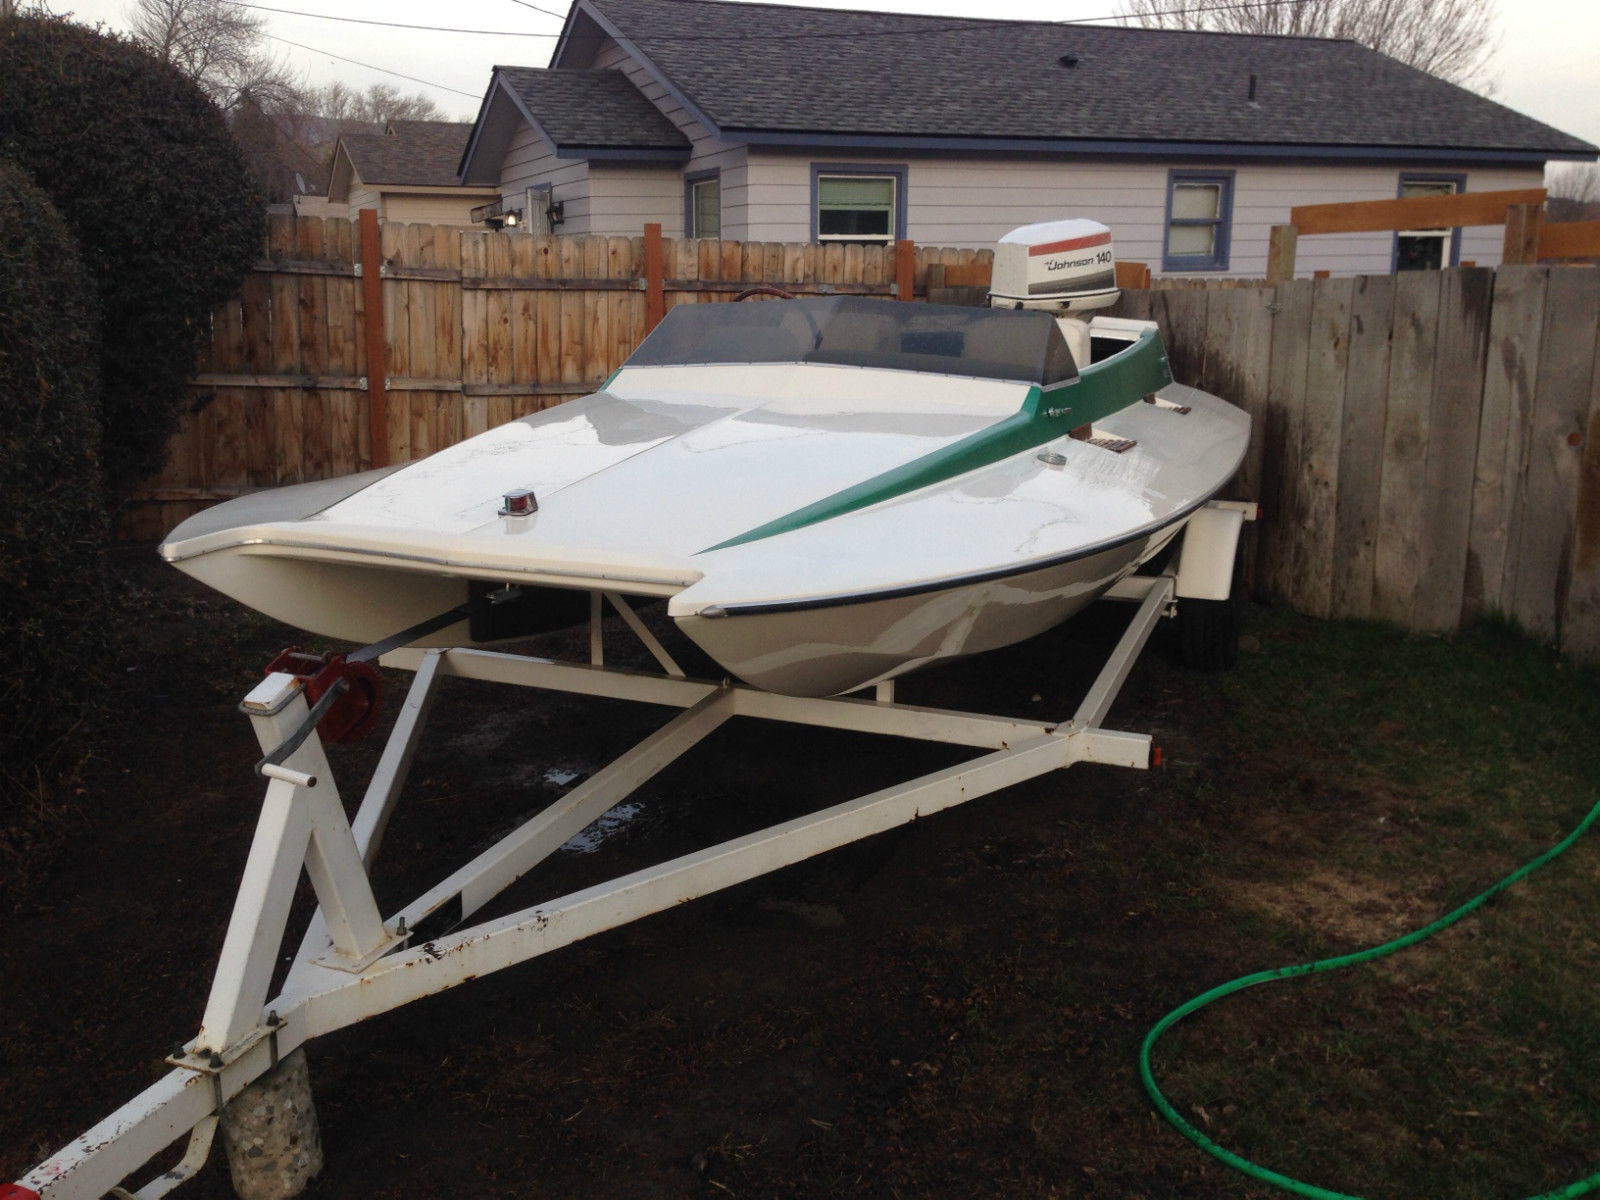 Tunnel Flite Hydro Race 1977 for sale for $5,000 - Boats ...